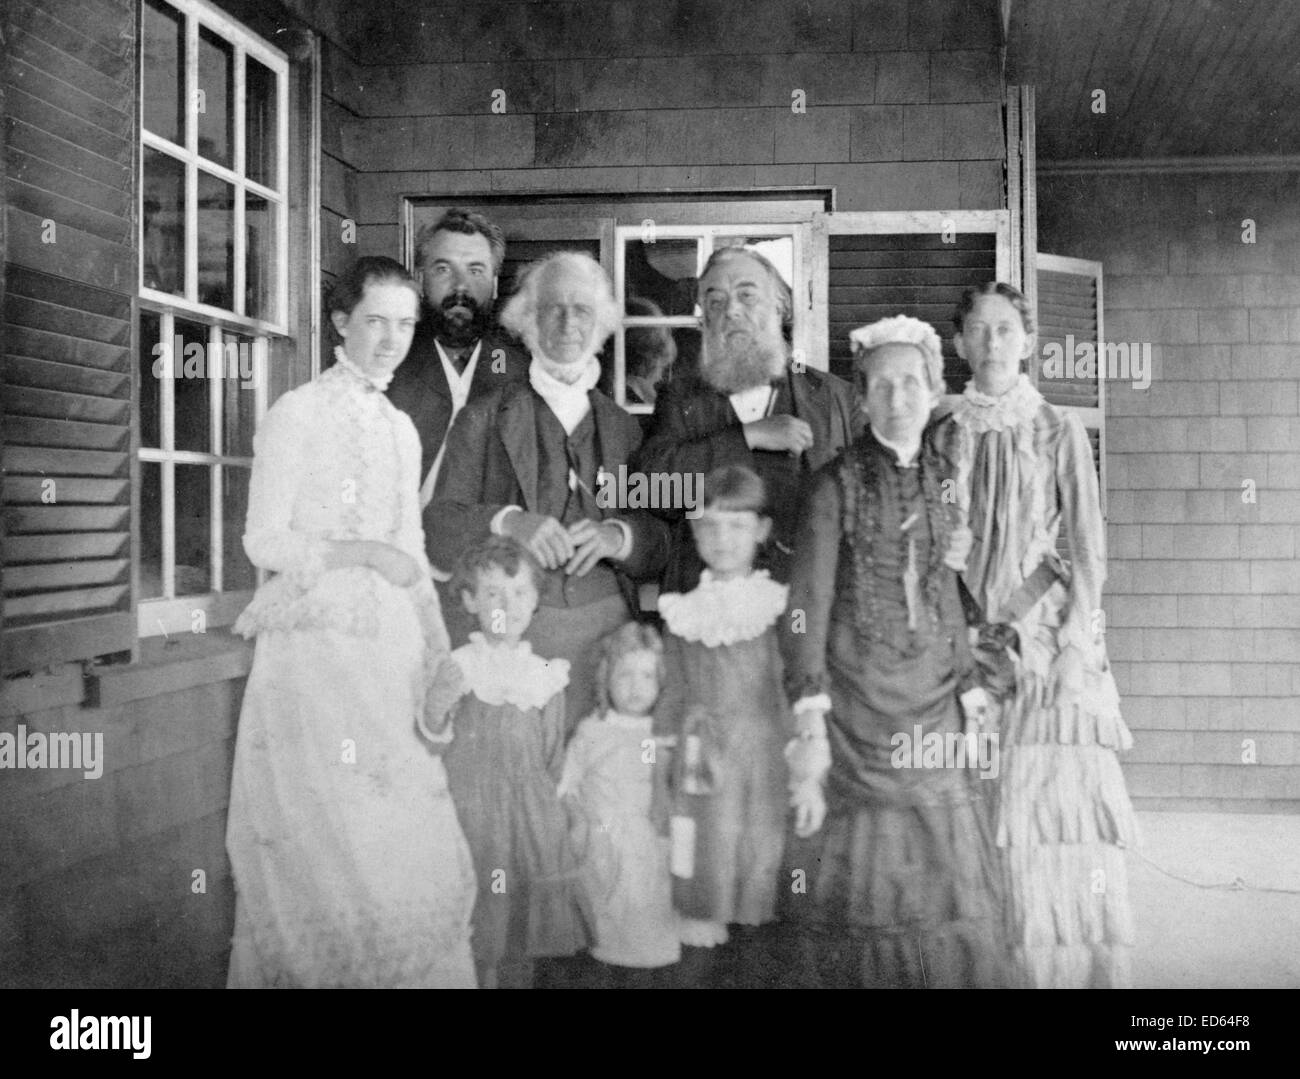 Mabel Hubbard Bell, Alexander Graham Bell, Dr. Bartol, Alexander Melville Bell, Eliza Grace Symonds, and Mary True with children, Daisy Bell, Gypsy Grossman, and Elsie Bell at the Hubbard home in Manchester, Mass., c1885, photographic print Stock Photo